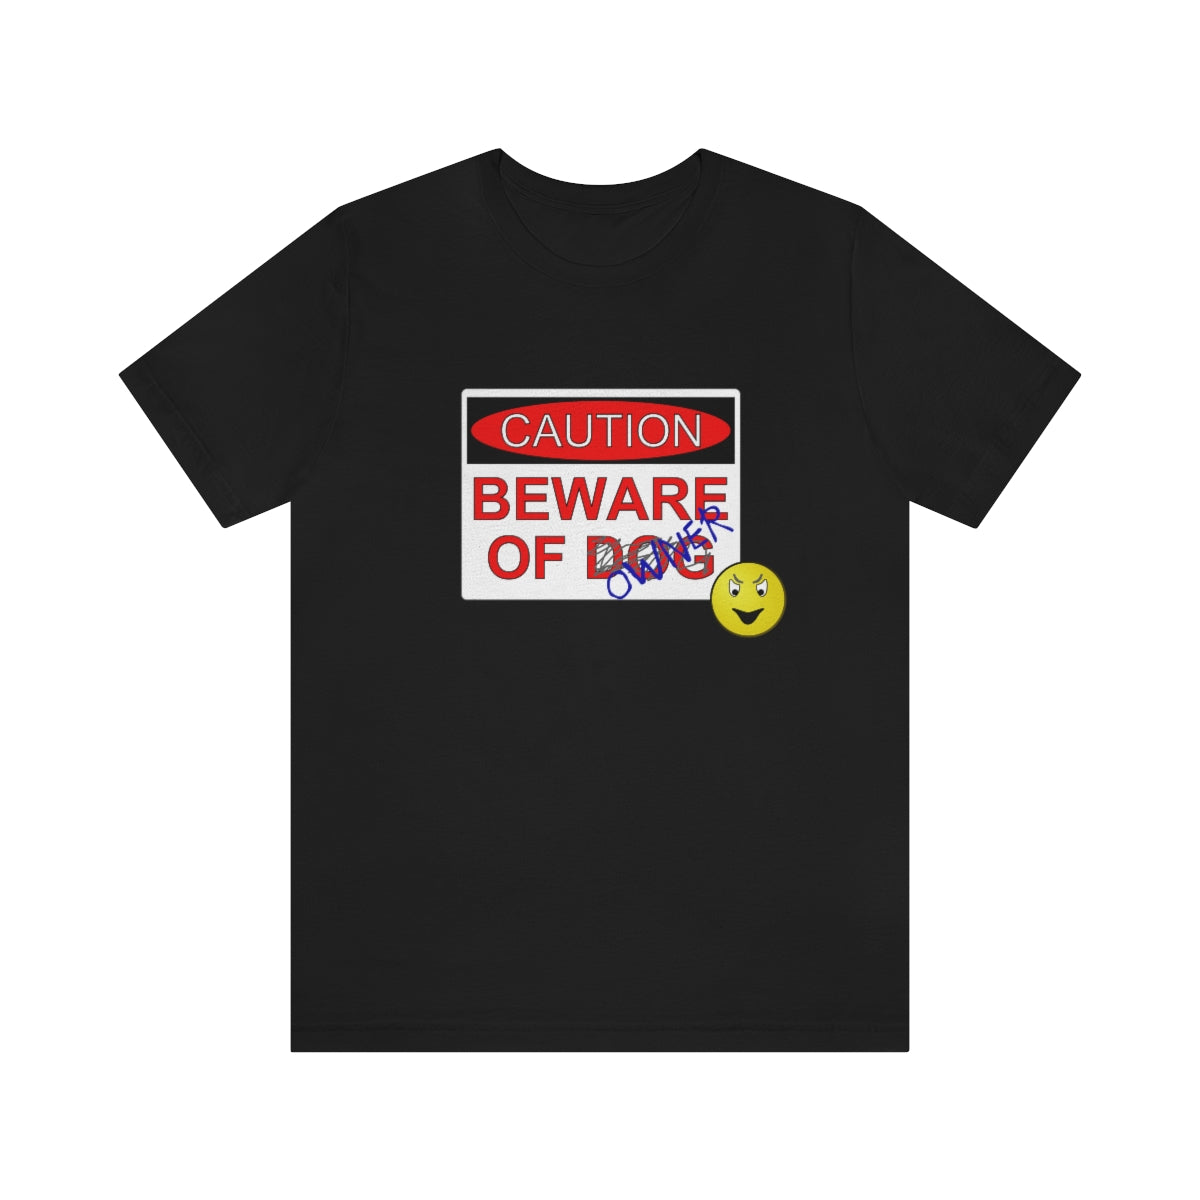 Caution - Beware of Owner - Funny - Unisex Short Sleeve Tee